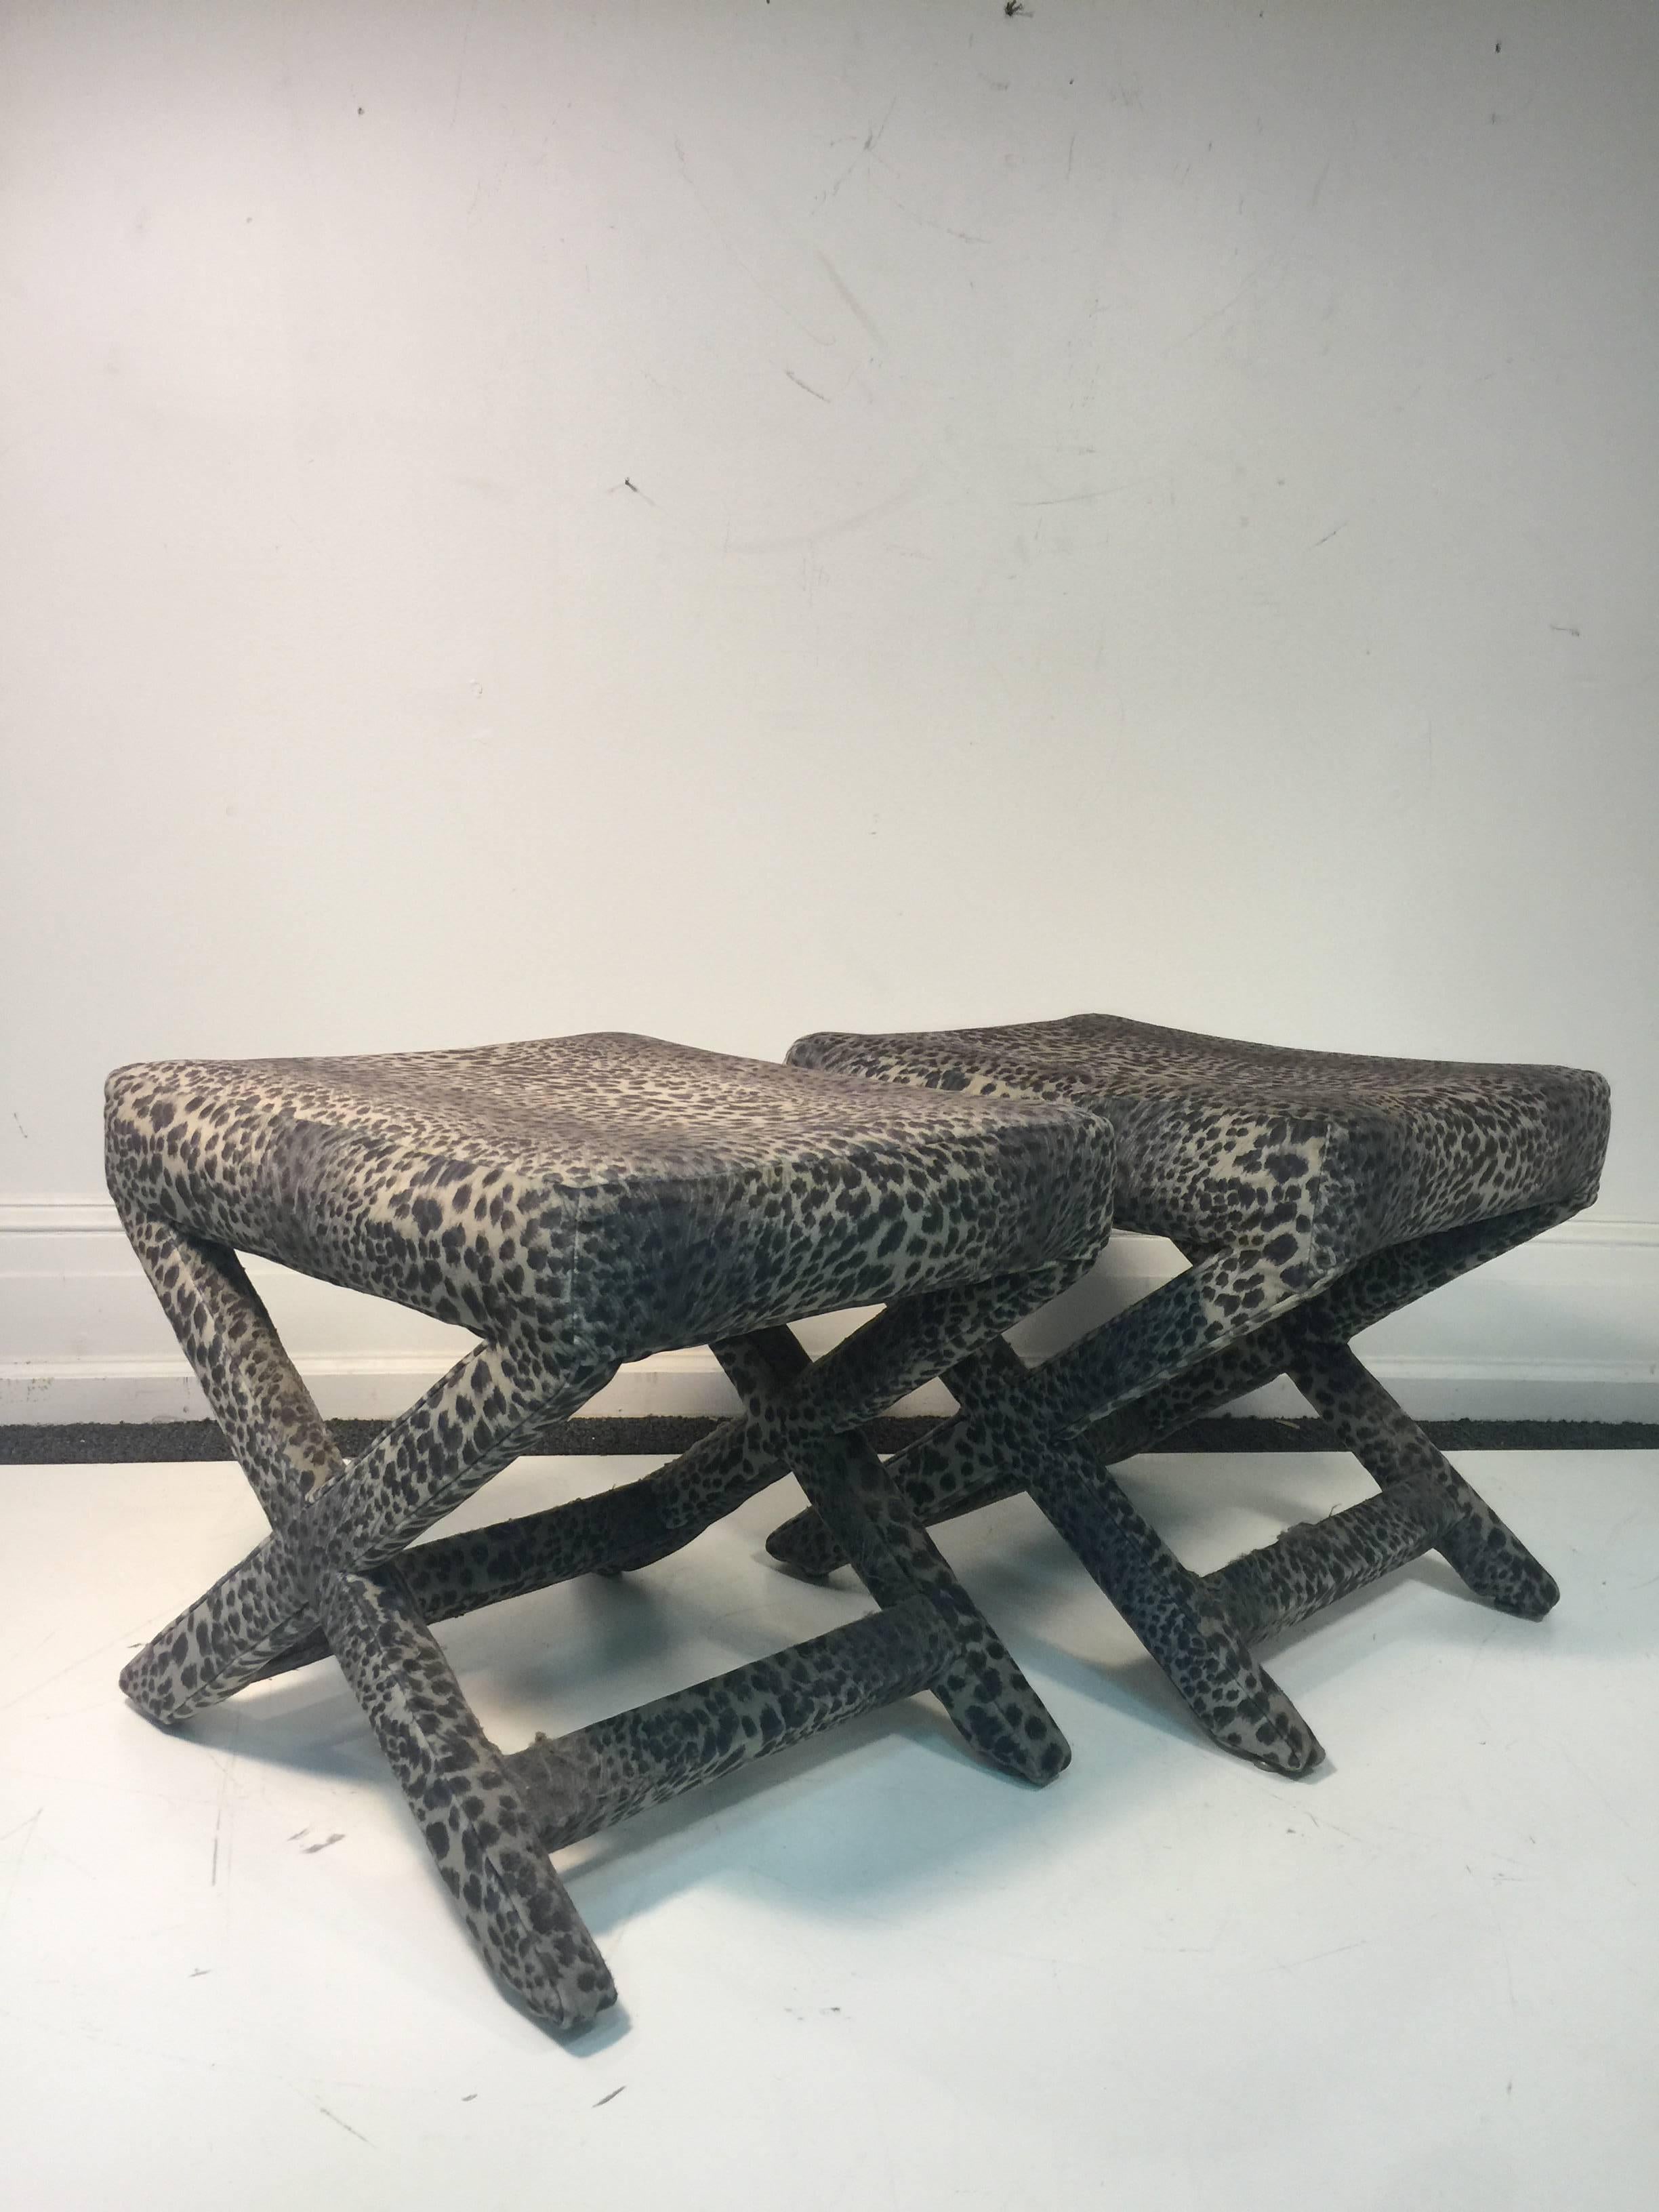 A lovely pair of X-base stools or benches upholstered in leopard print fabric, circa 1970. Good condition with age appropriate wear.